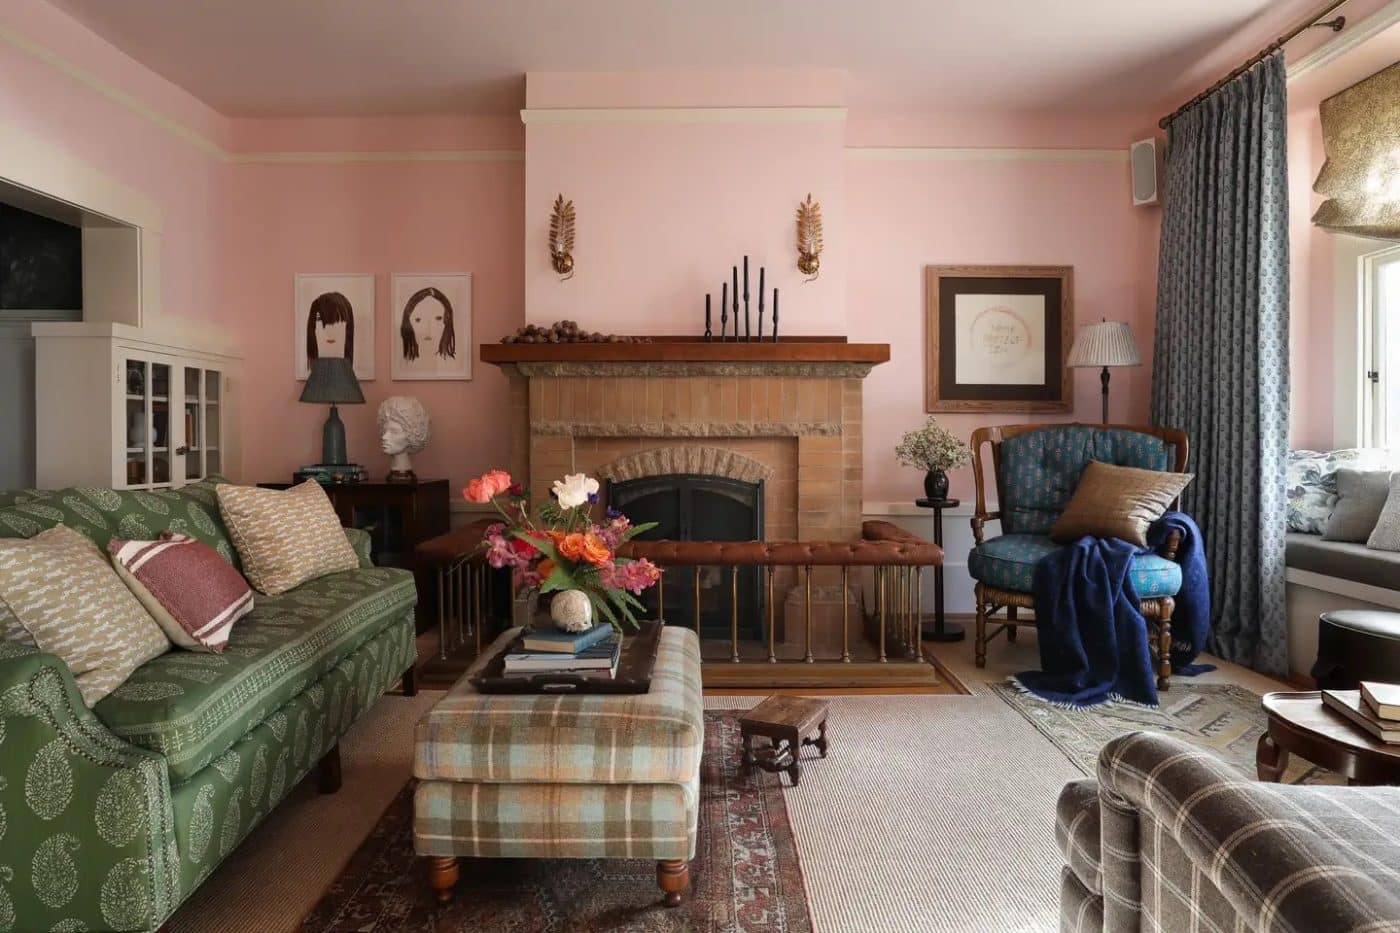 A living room with muted pink walls and traditional furnishings in a variety of patterns.